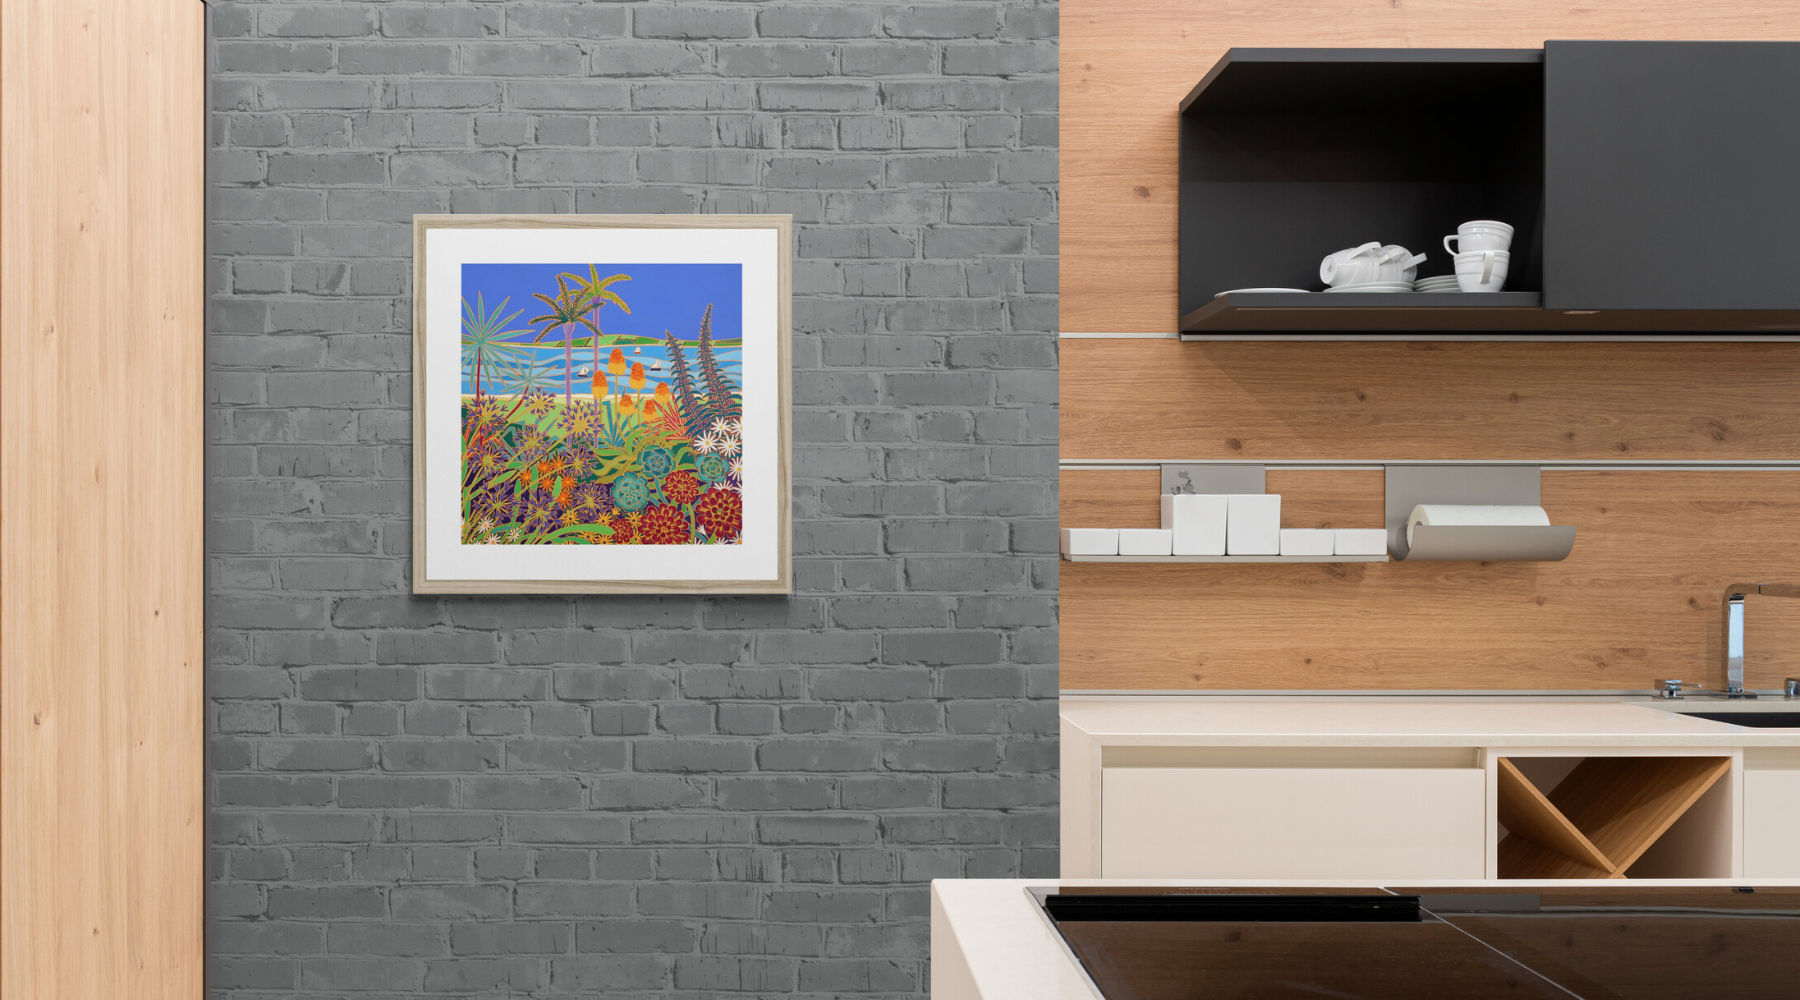 Art displayed in a kitchen setting. Print features art by Cornish artist Joanne Short of the Tresco Abbey Gardens